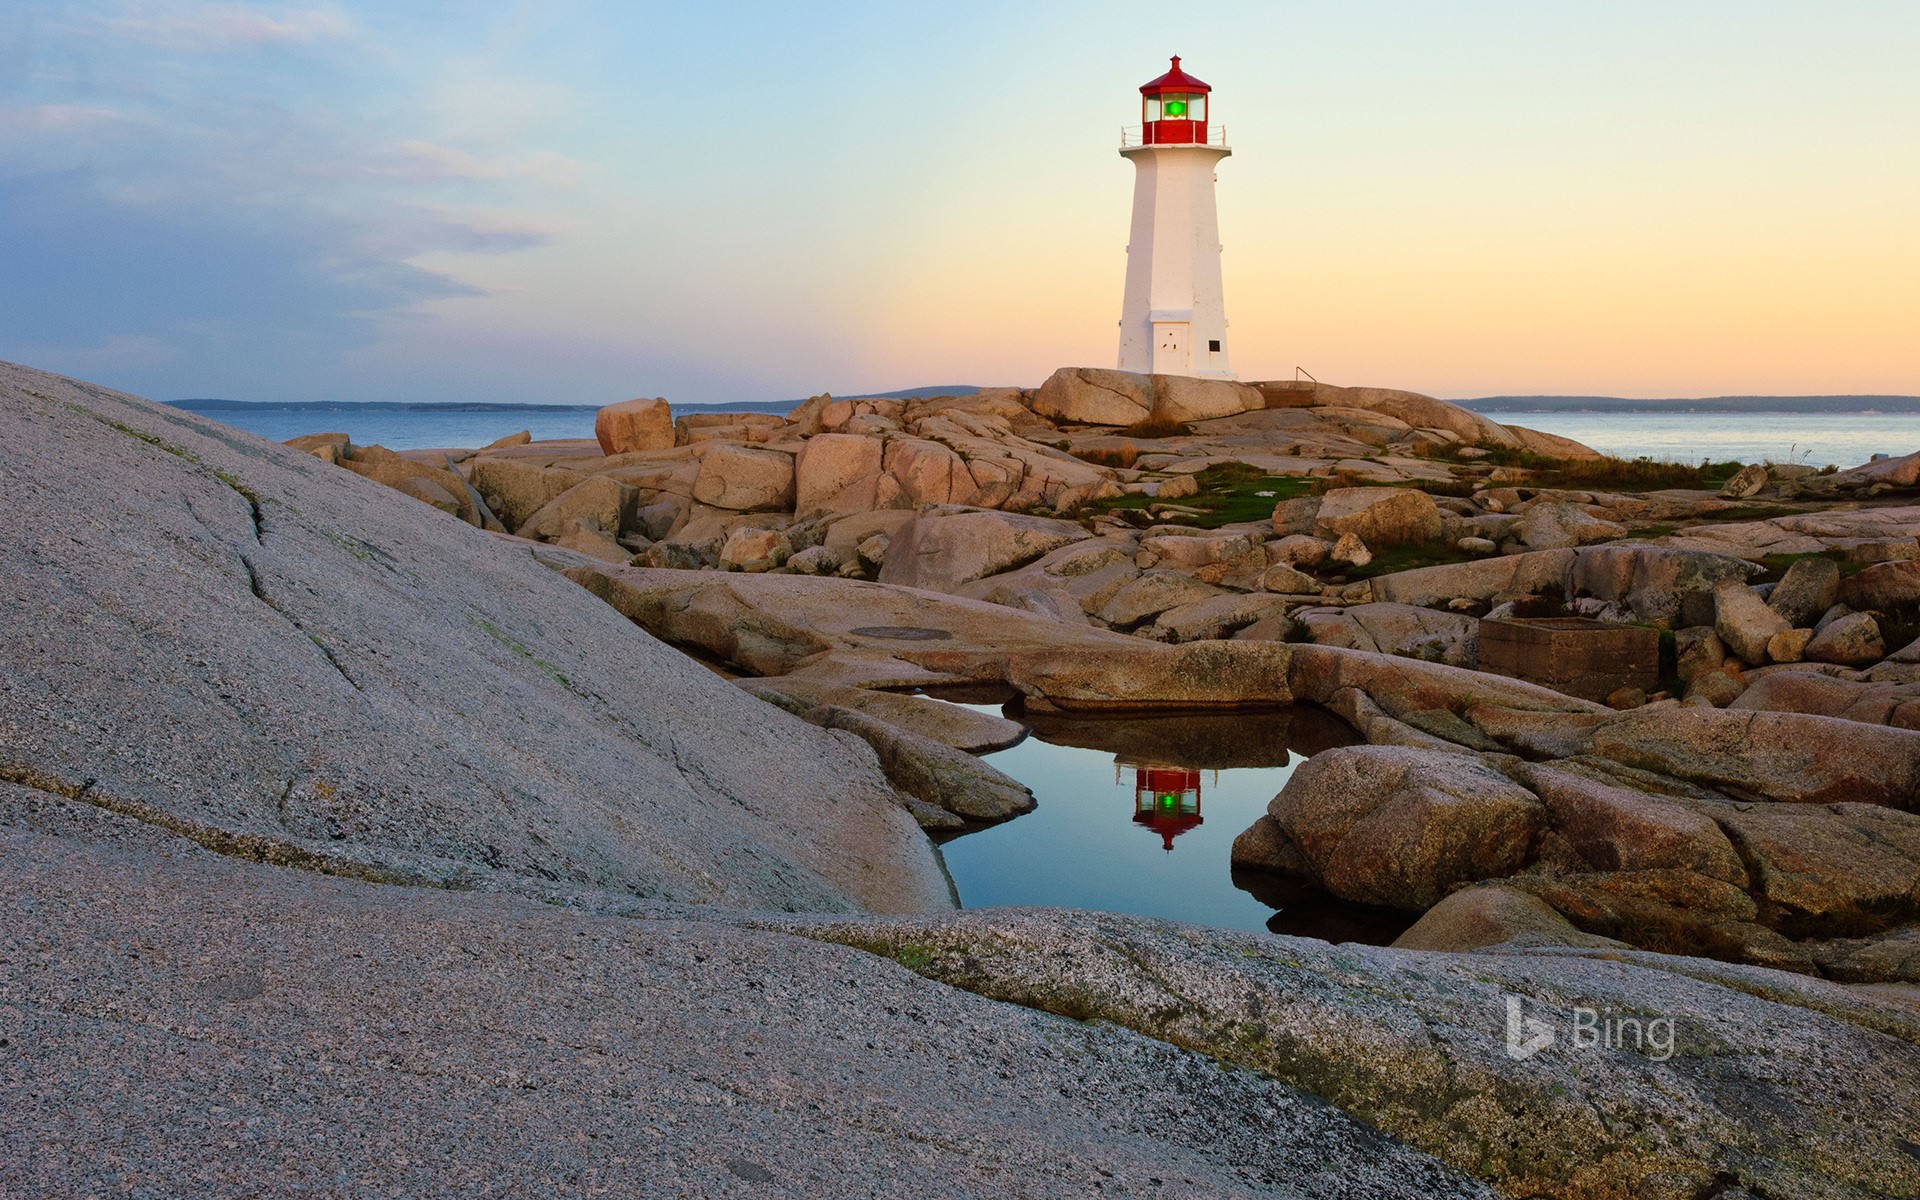 Lighthouse reflected in a pool of water at Peggy's Cove, Nova Scotia, Canada